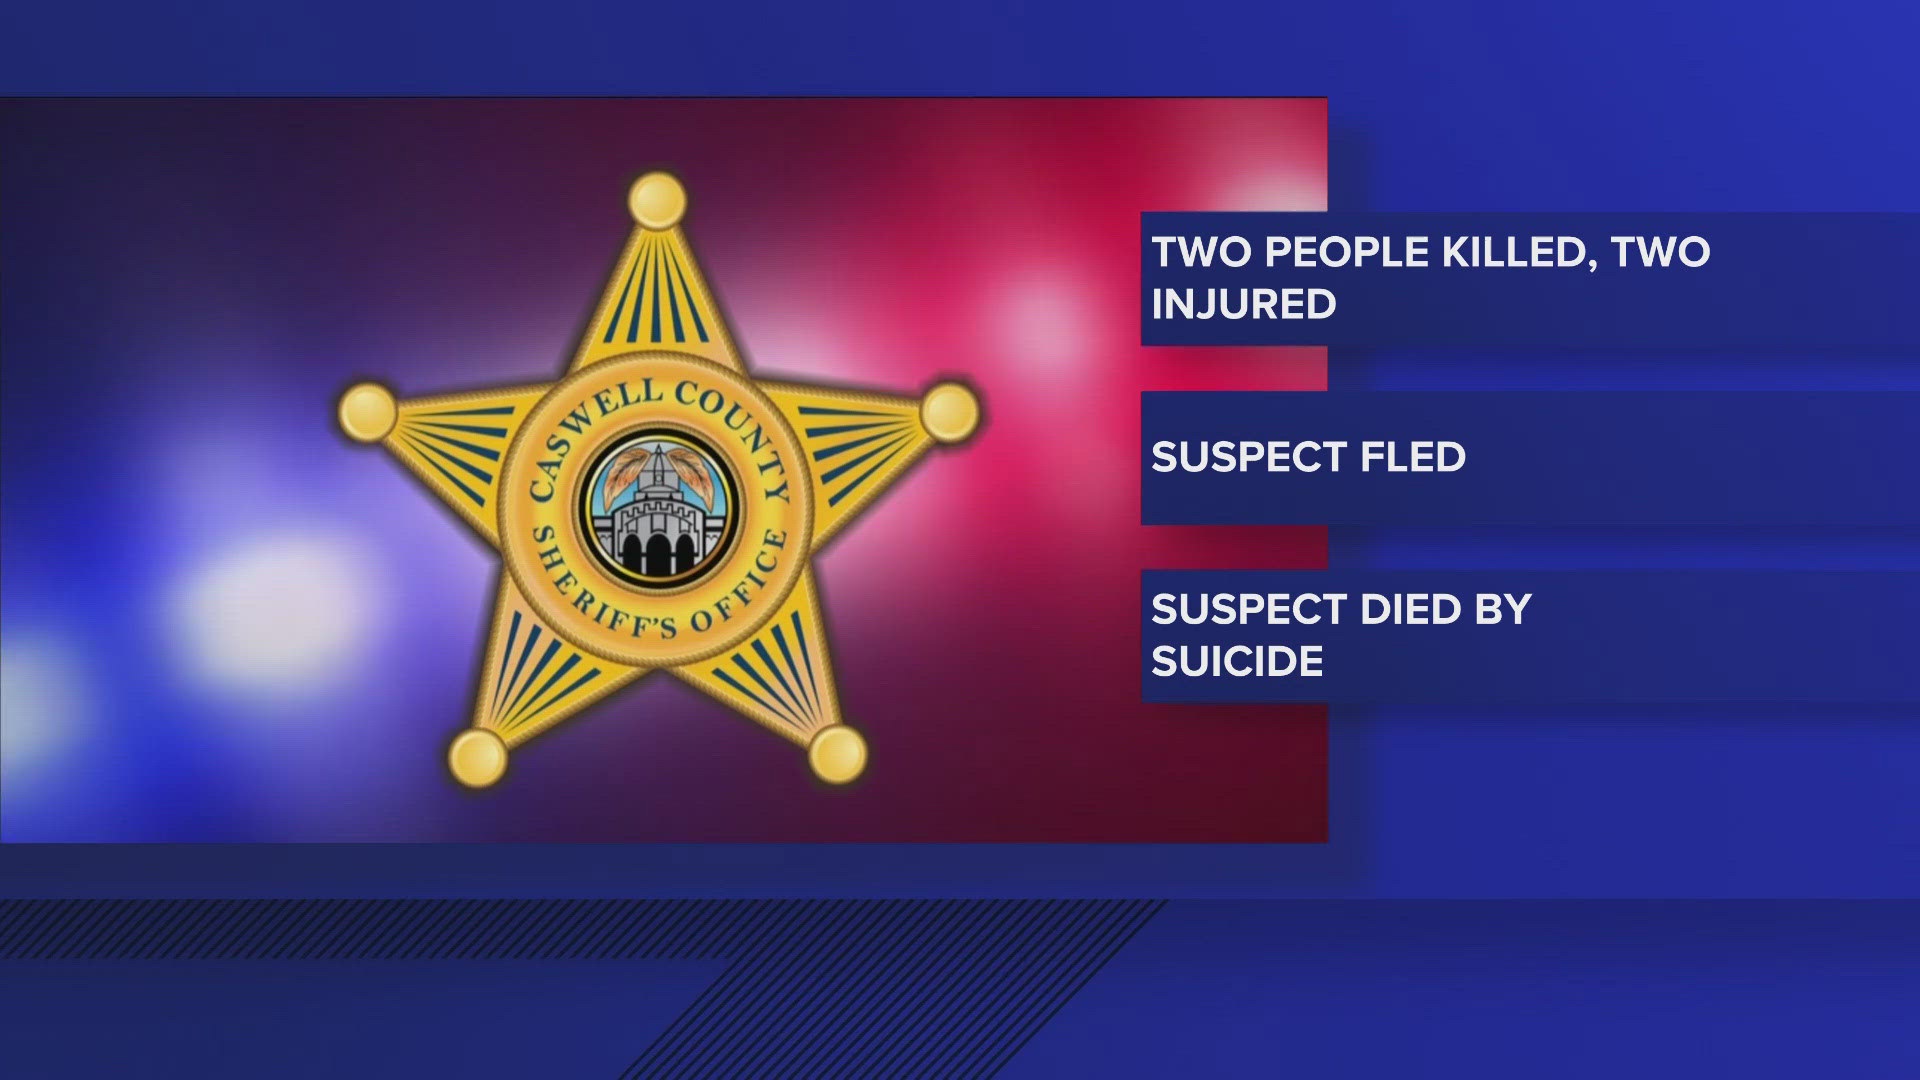 The Sheriff’s Office says the suspect died by suicide.